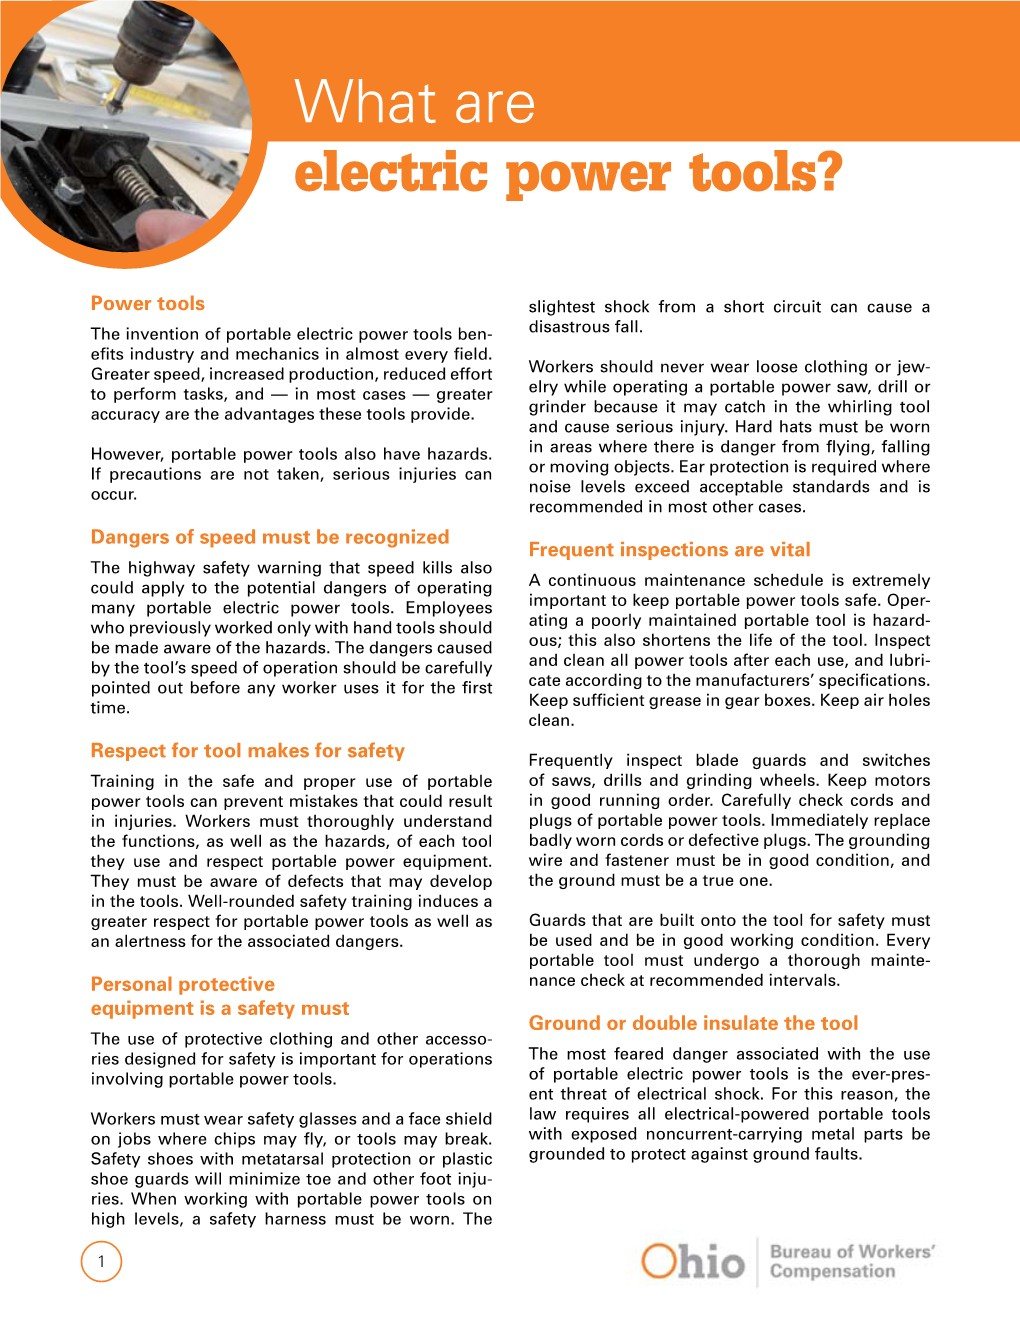 What Are Electric Power Tools?